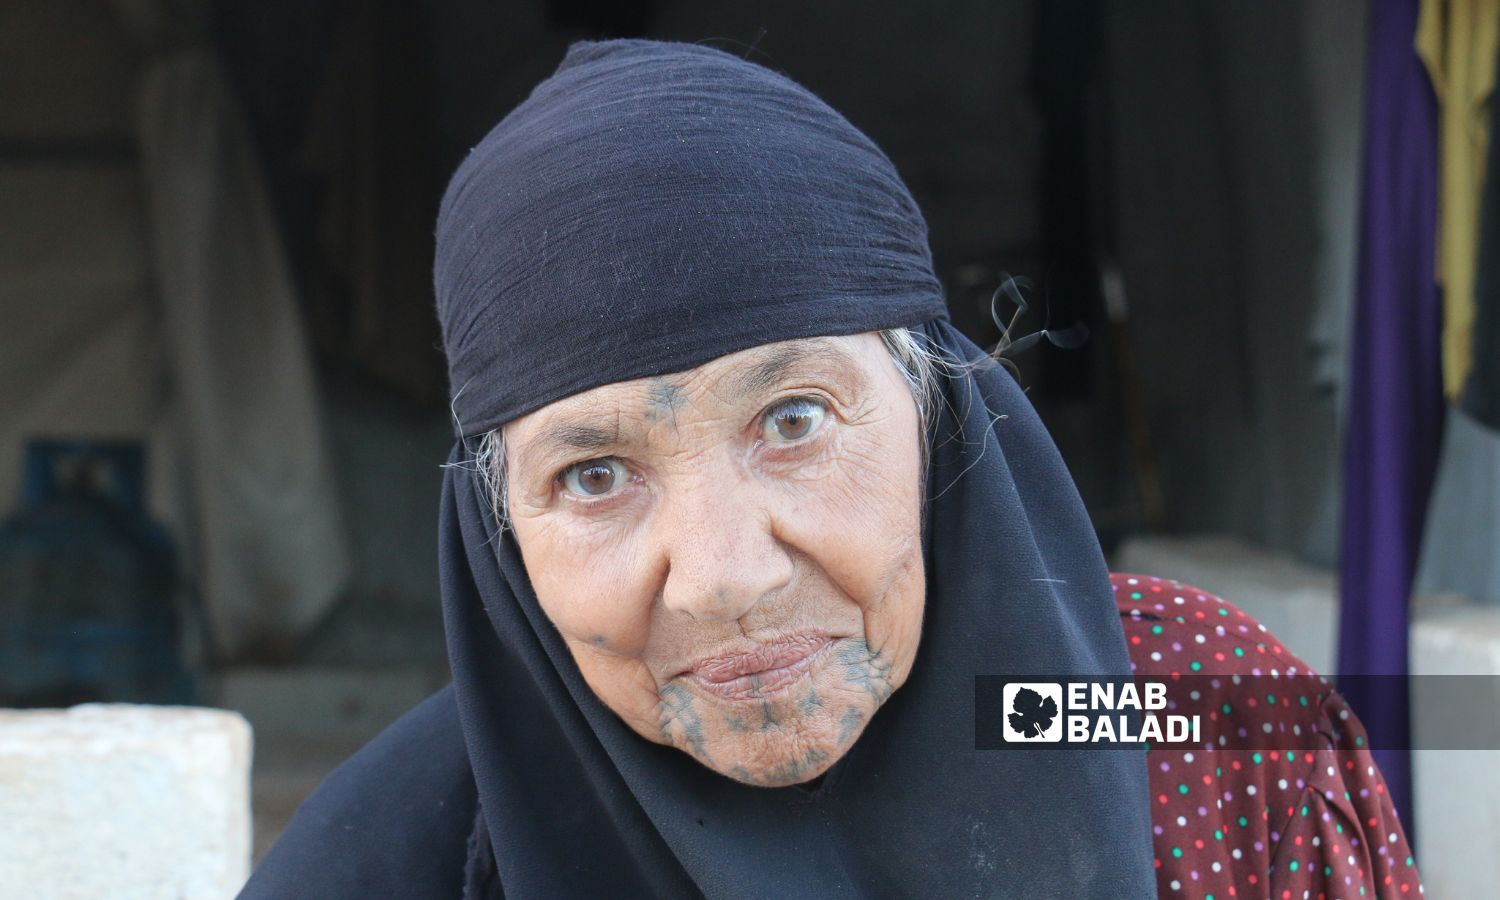 The Arab tattoo (al-Daqq) is one of the customs and traditions inherited in Syria, adorning the face of an old woman in the northern countryside of Aleppo city - July 7, 2023 (Enab Baladi/Dayan Junpaz)